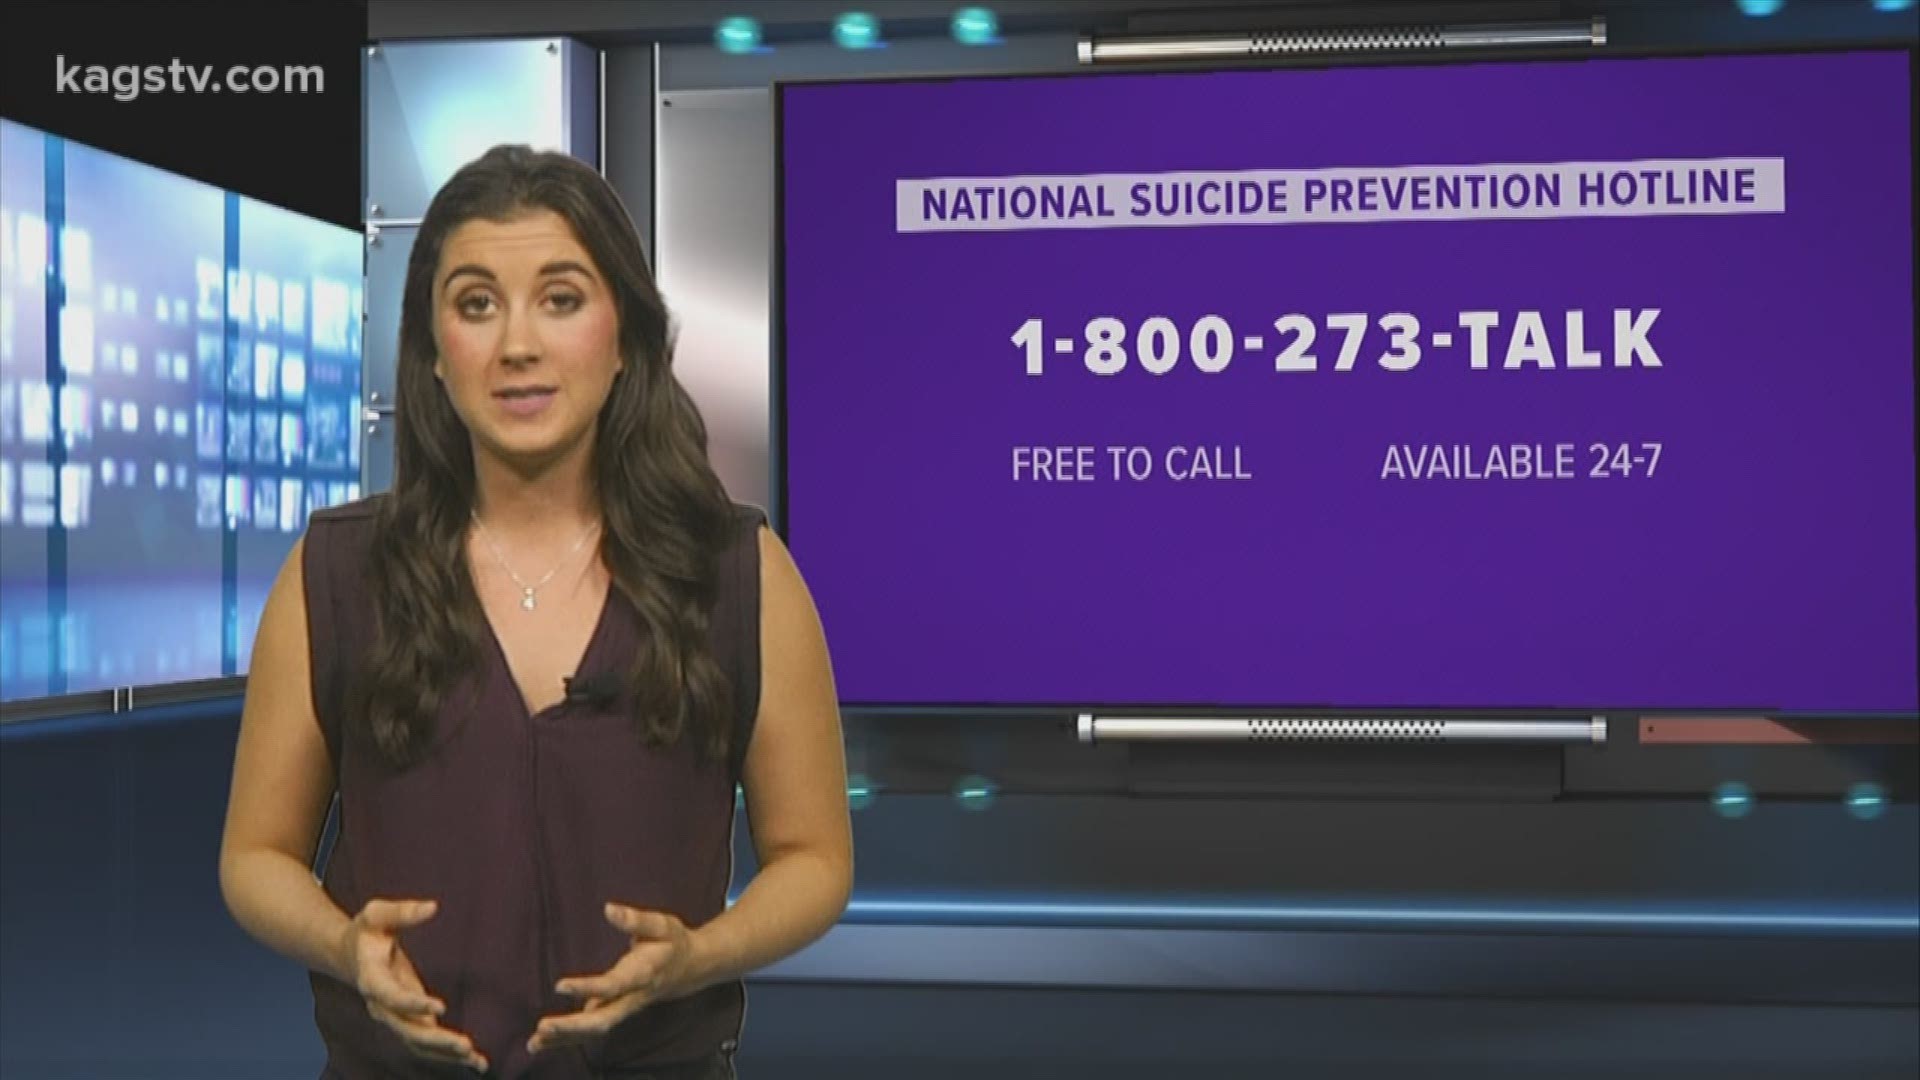 The CDC says many people who die by suicide do not have a diagnosed mental health condition. However, there are still warning signs you should know to look out for.